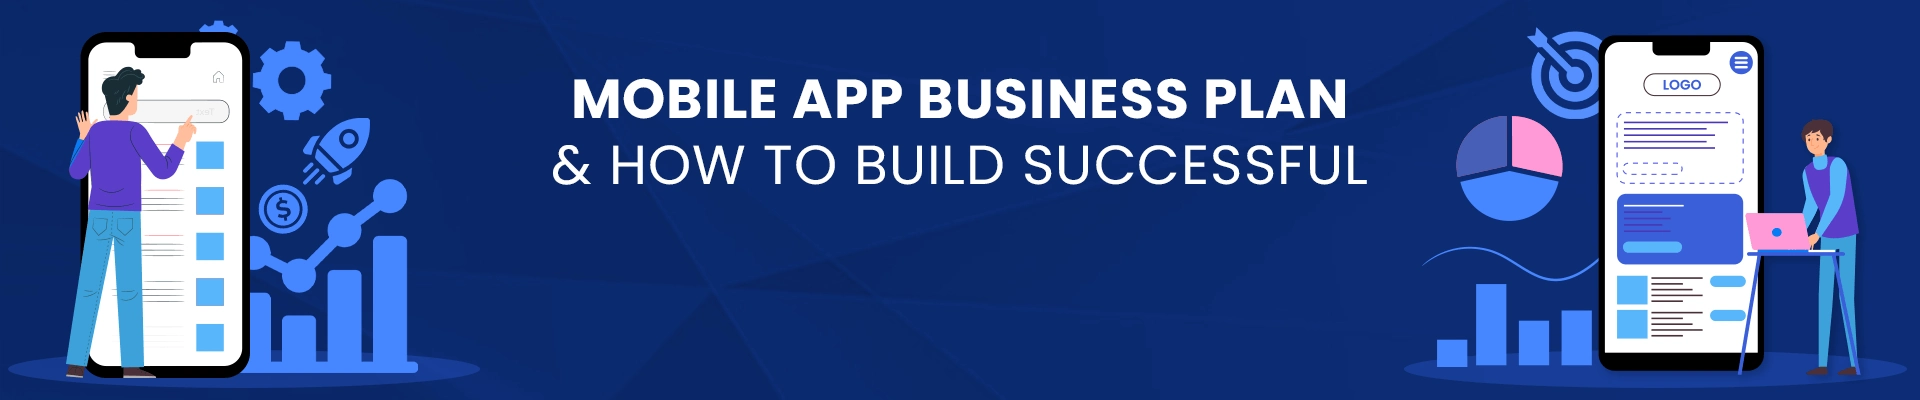 What Is a Mobile App Business Plan and How to build Successful?